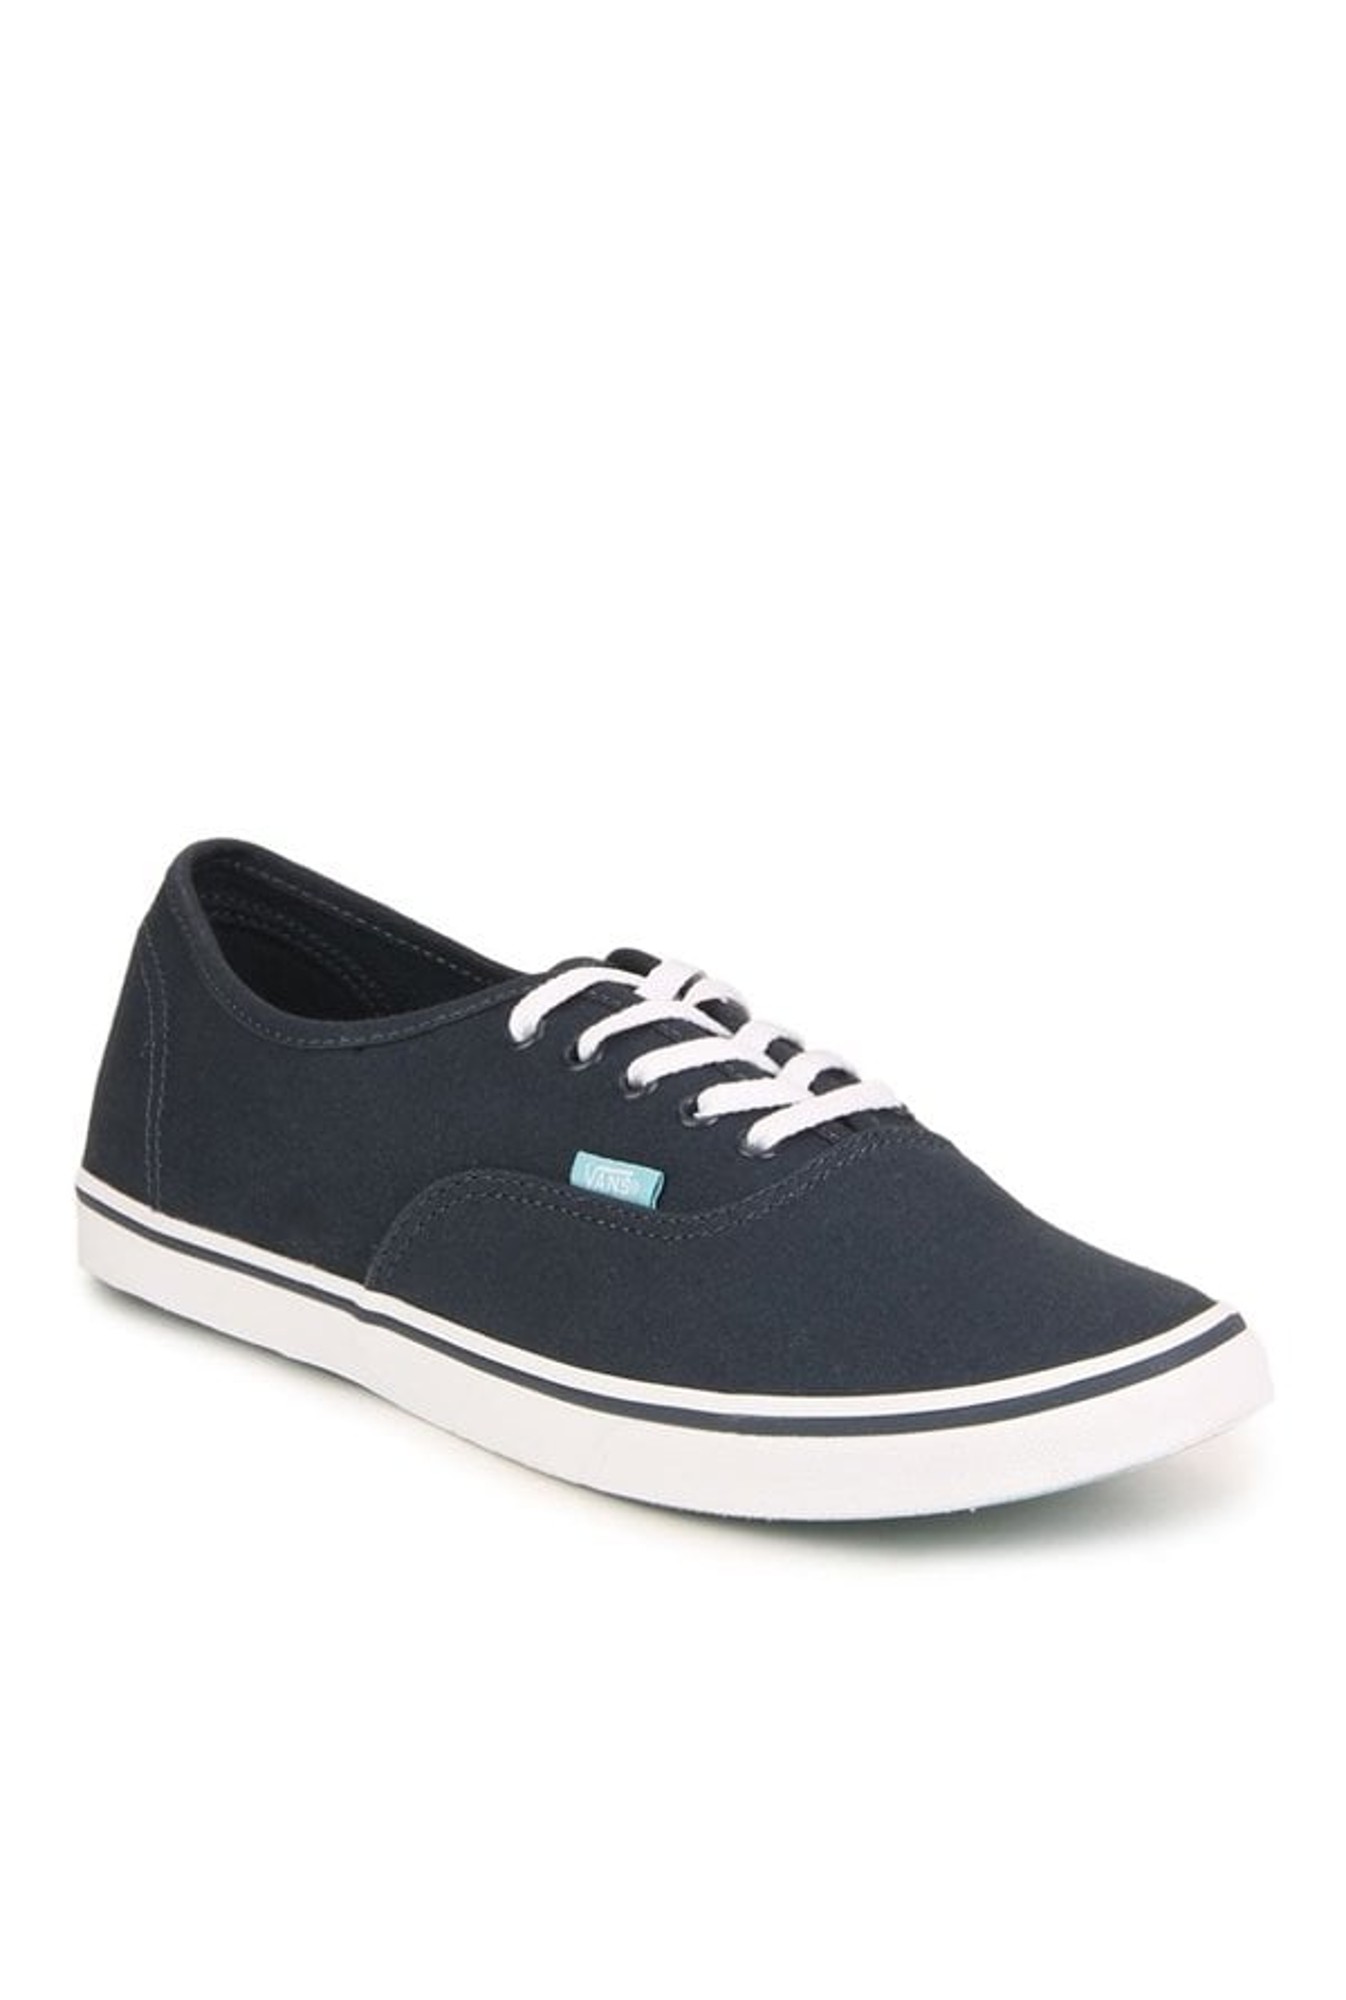 Buy Vans Authentic Lo Pro Midnight Navy Sneakers From Top Brands At Best  Prices Online In India | Tata Cliq